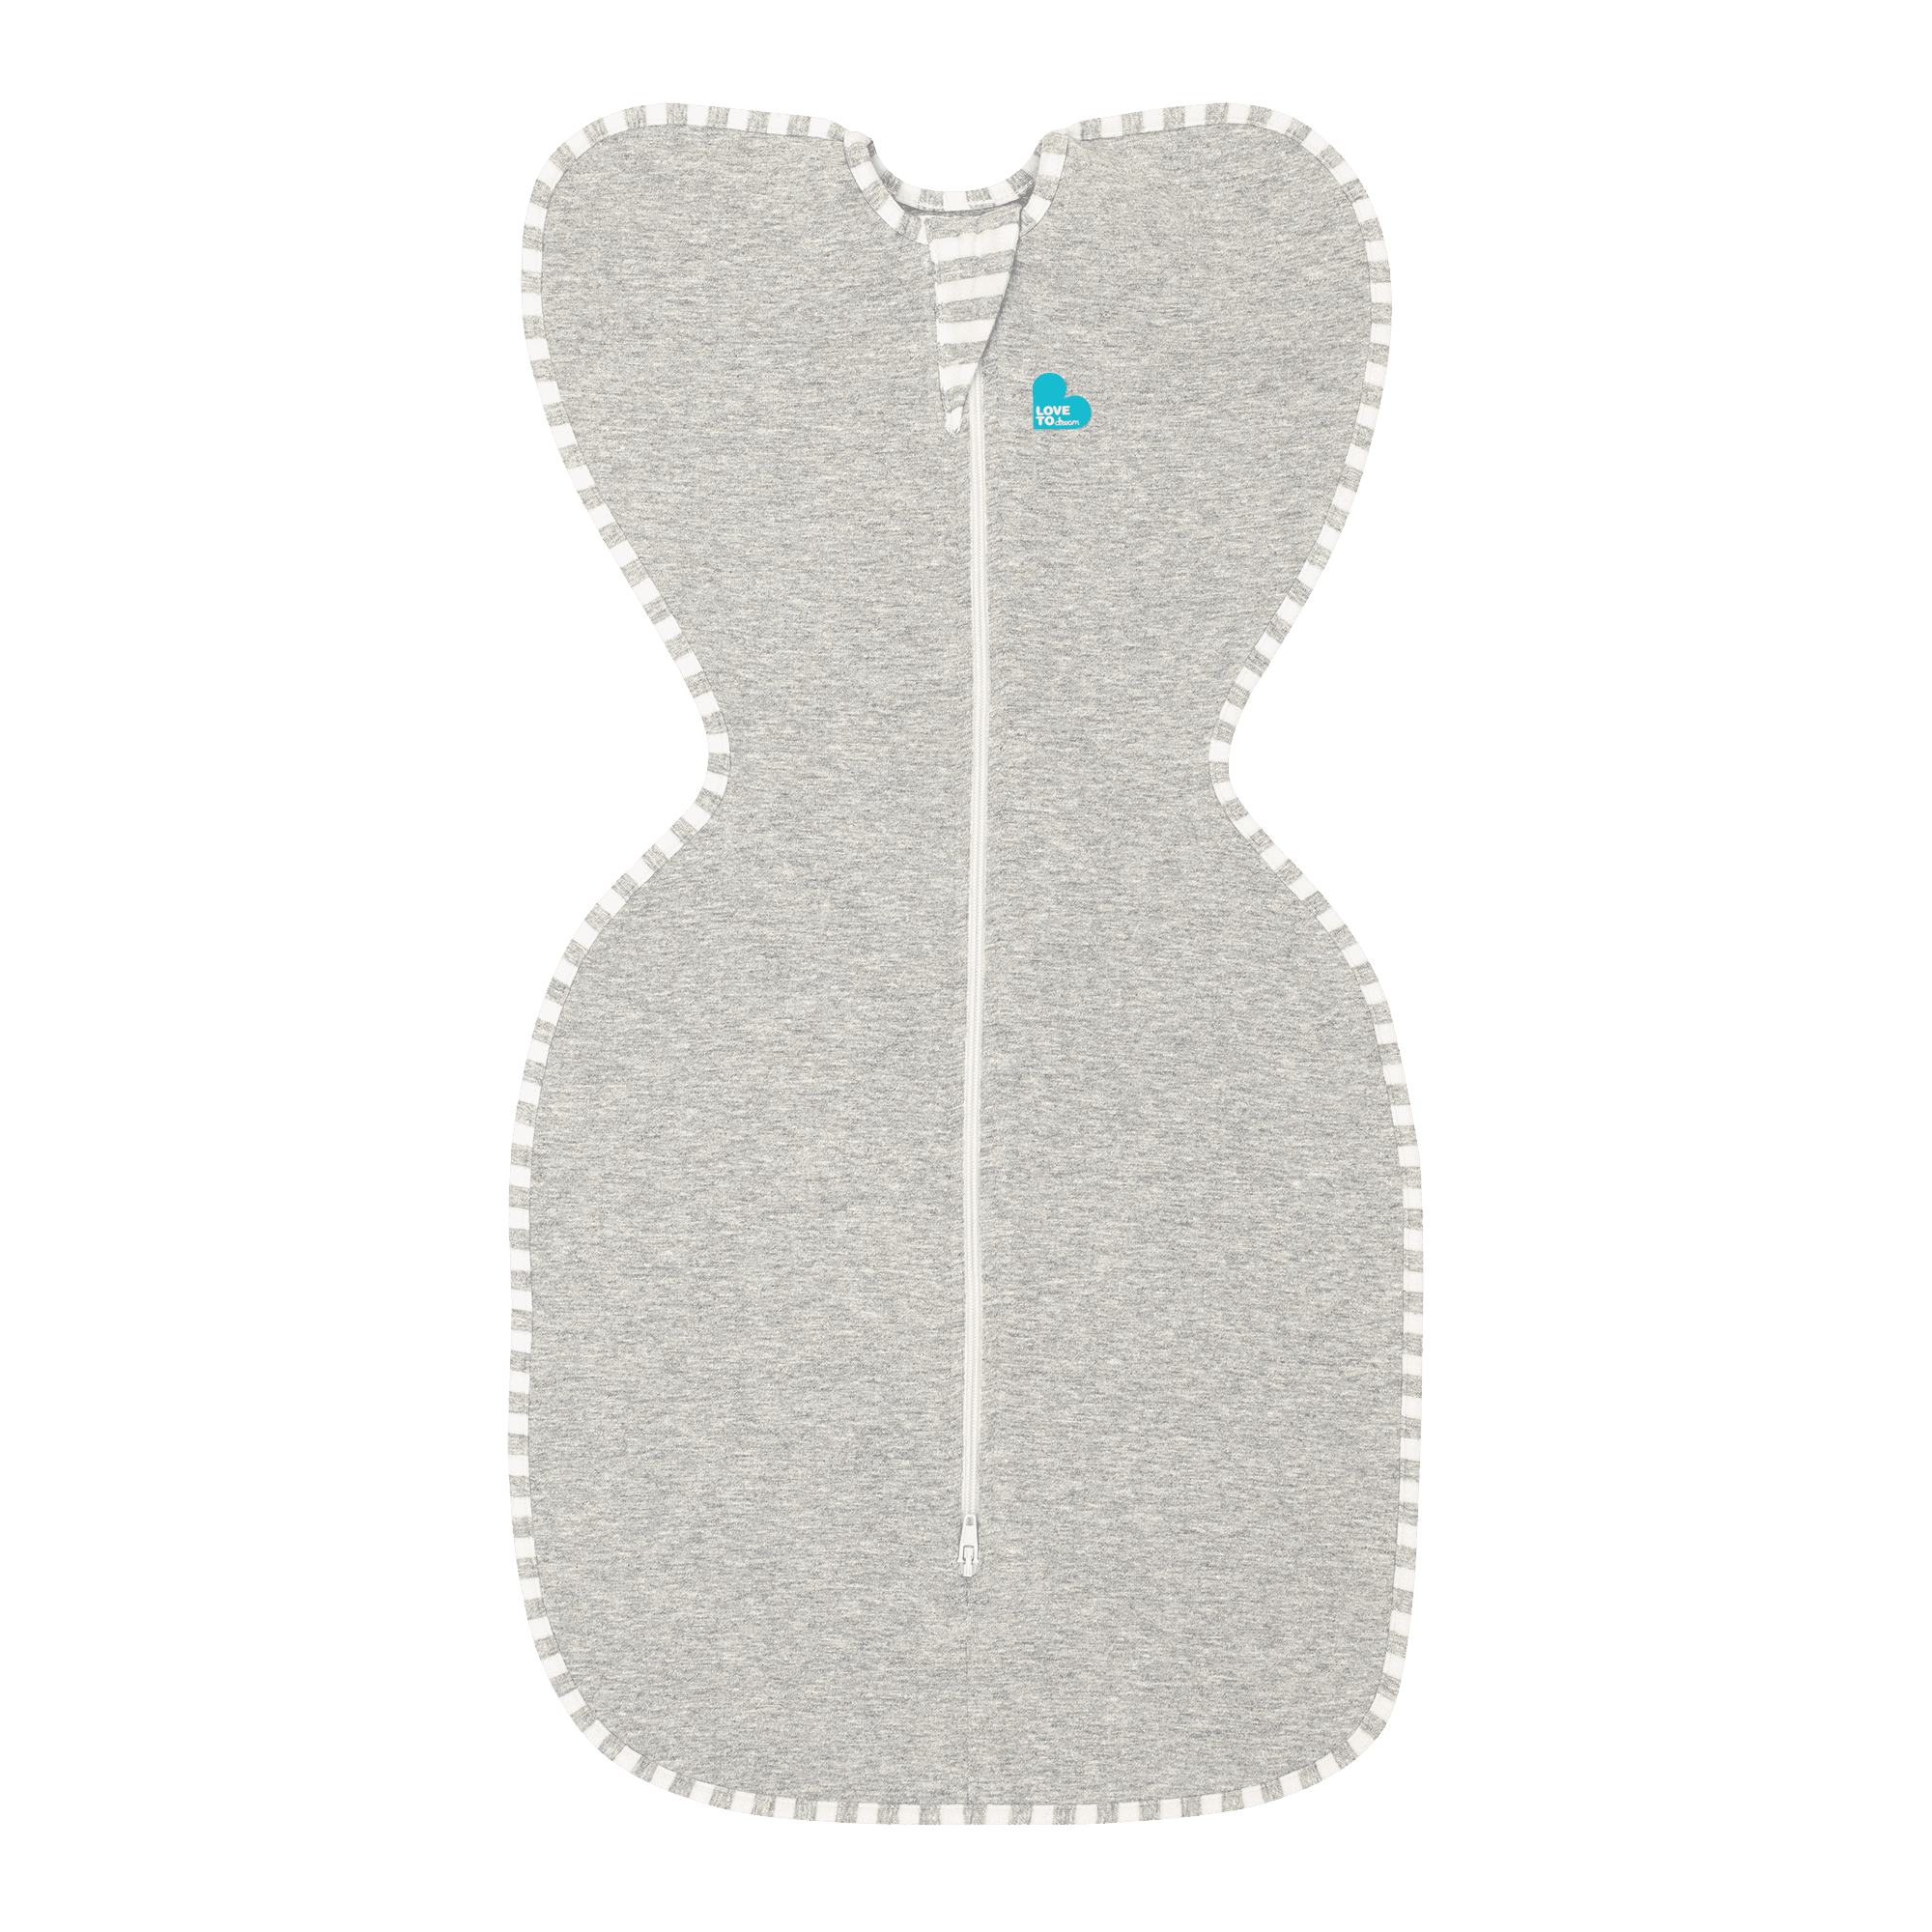 Newborn Mint Allow Baby to Sleep in Their Preferred arms up Position for self-Soothing snug fit Calms Startle Reflex Dramatically Better Sleep Love To Dream Swaddle UP Organic 5-8.5 lbs. 